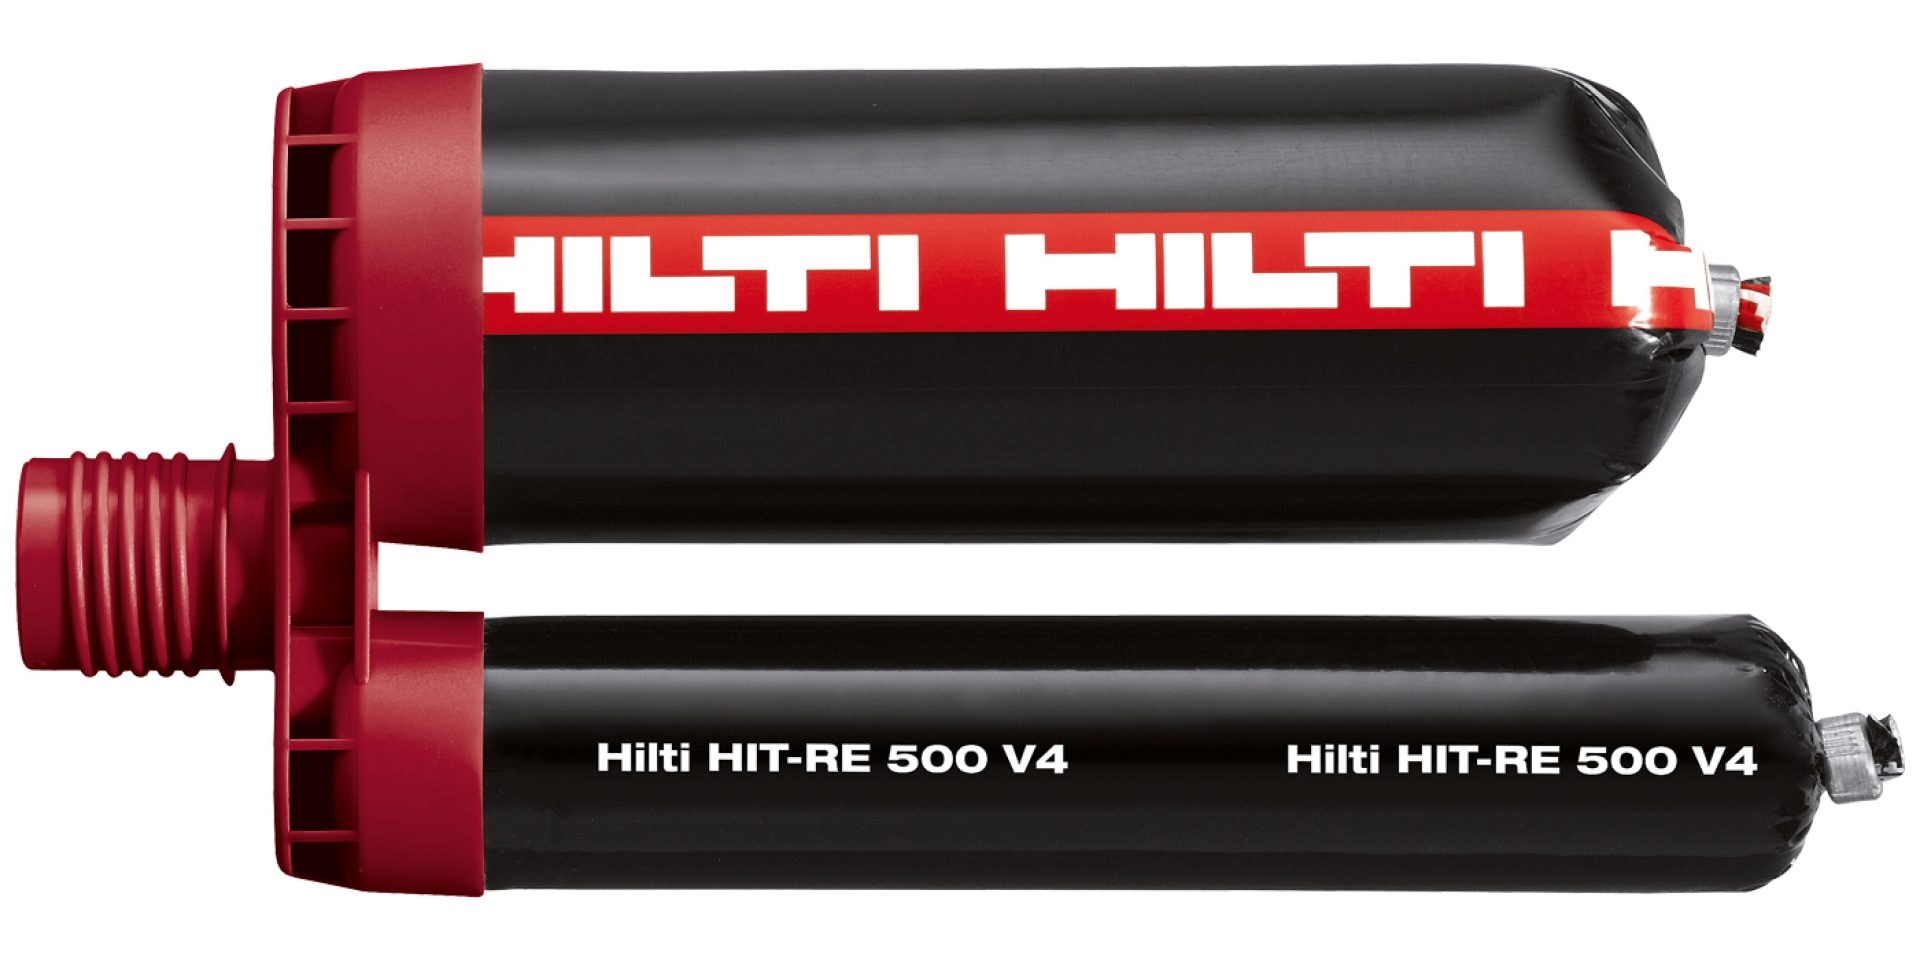 HIT-RE 500 V4 Ultimate-performance epoxy mortar as part of the Hilti SafeSet system